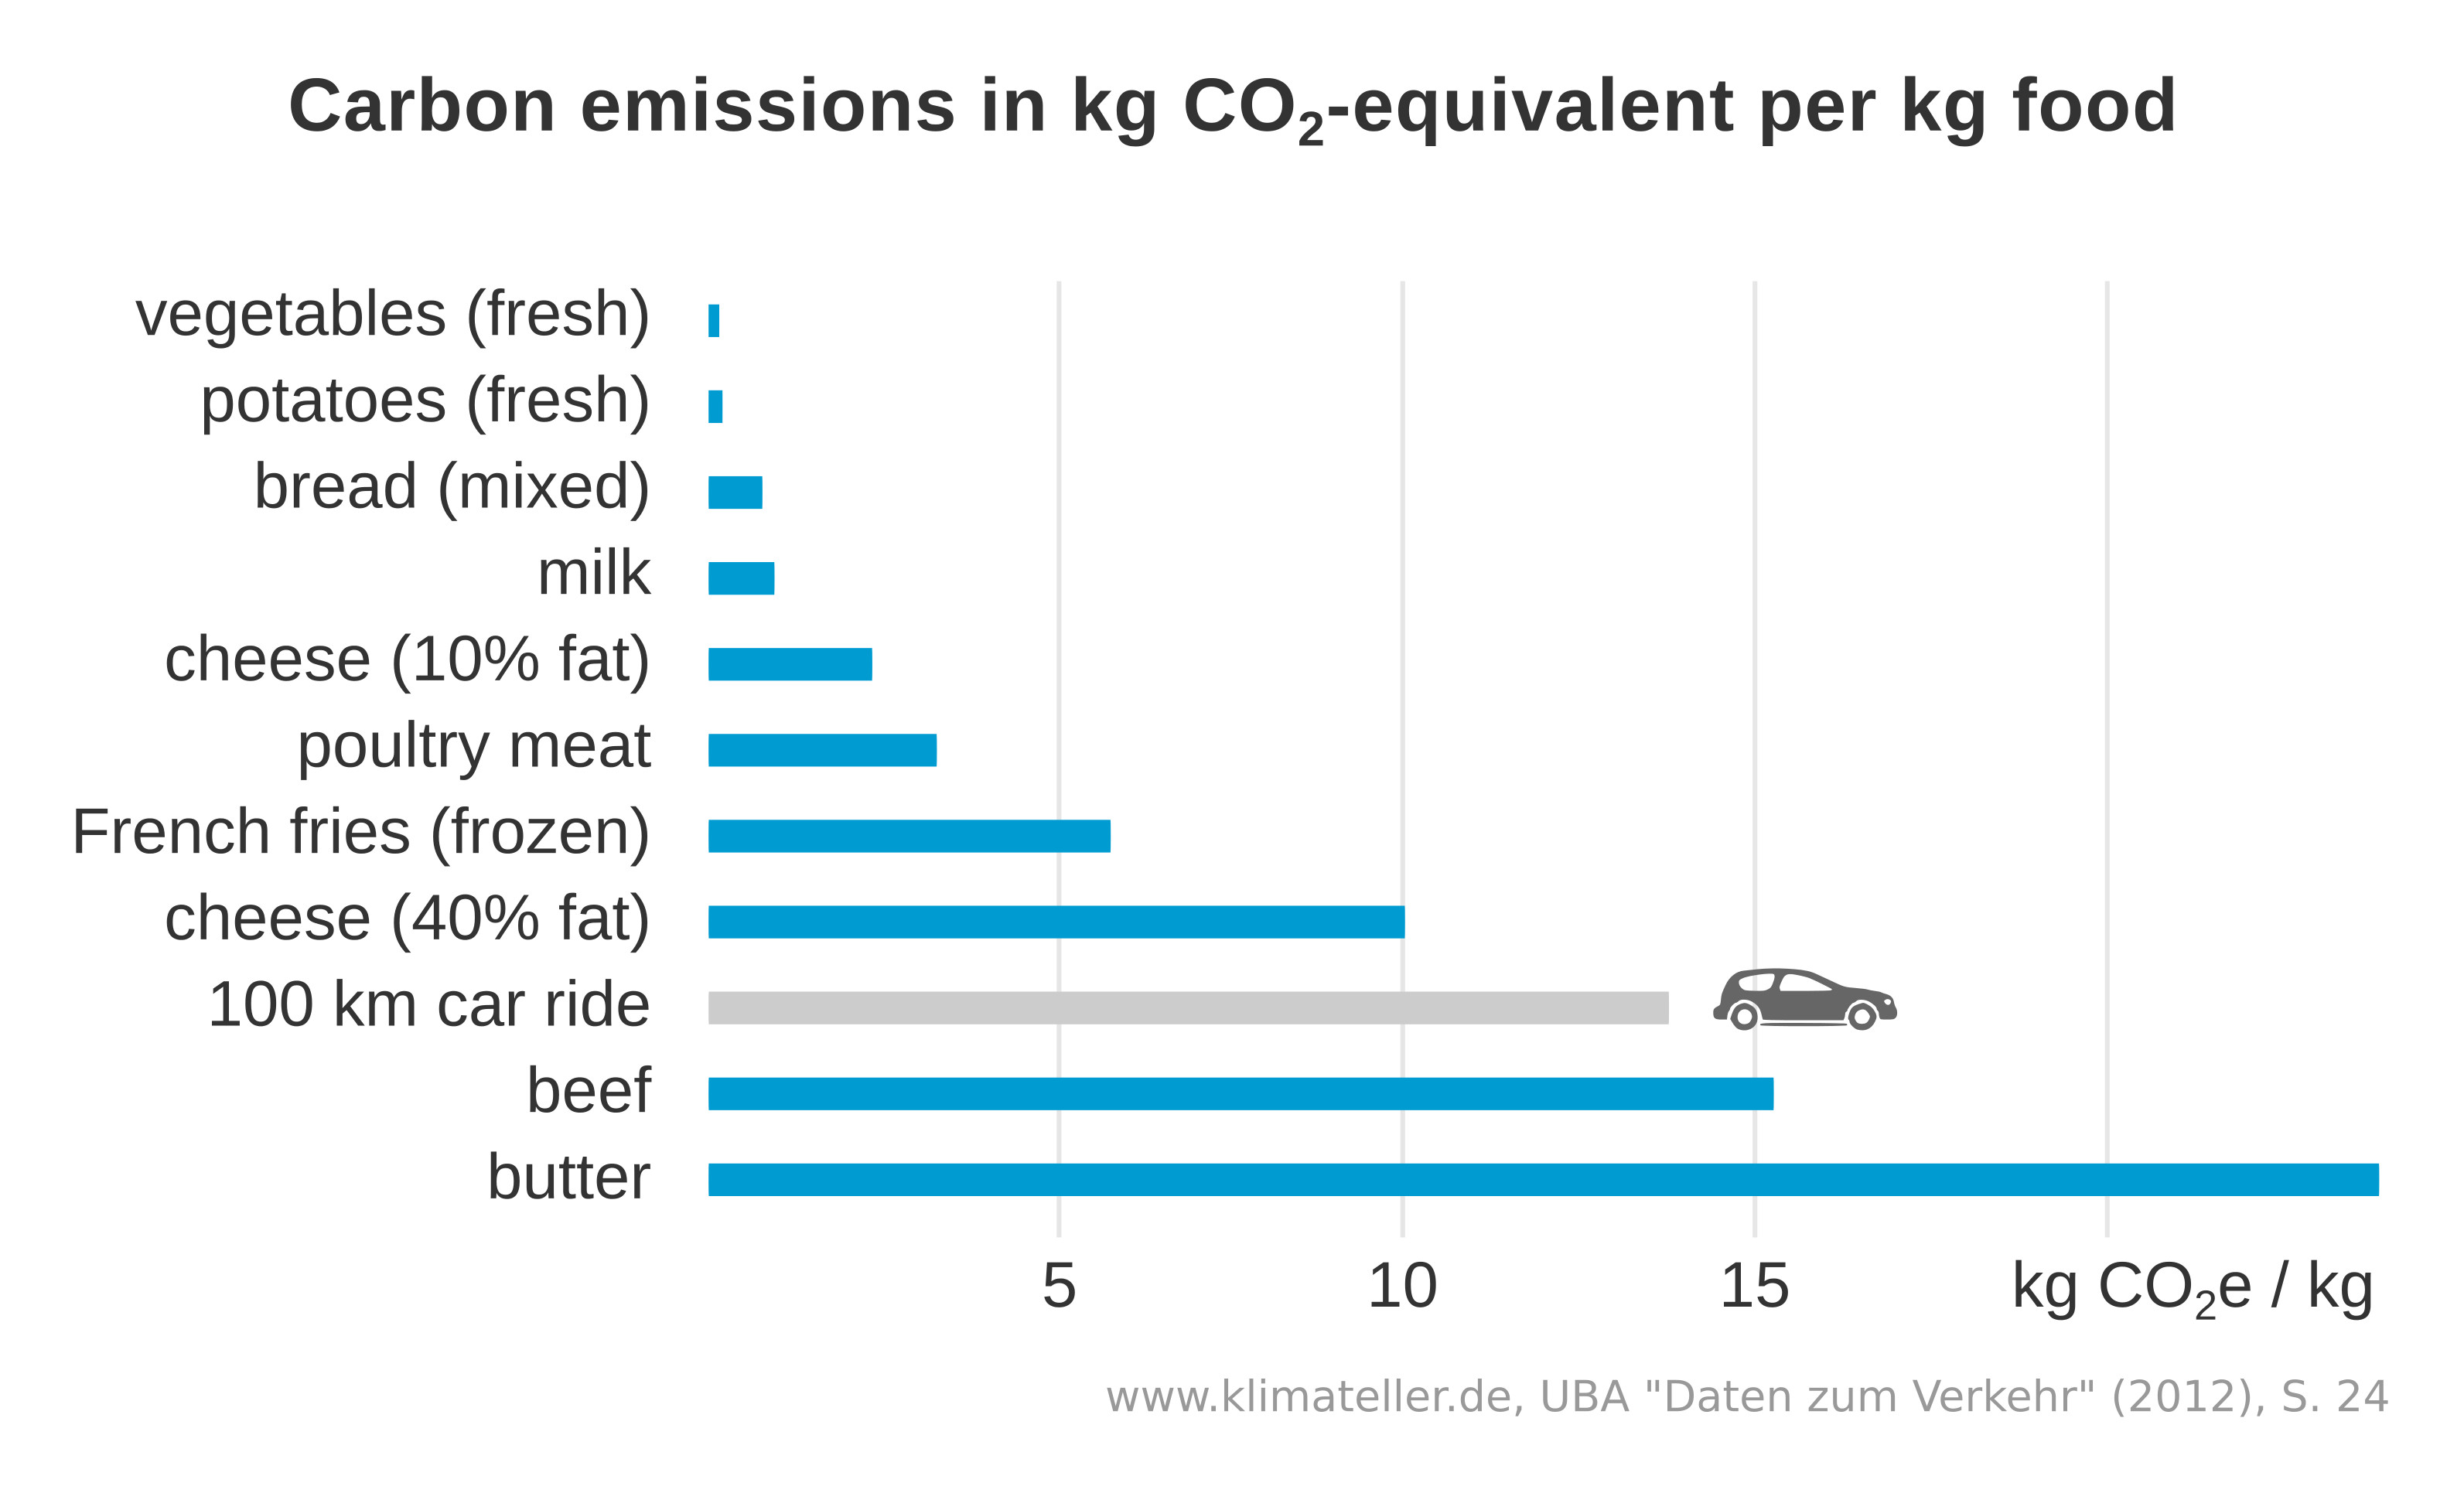 info chart: comparison of carbon emissons of different foods: butter and meat has the most, fresh vegetables the least